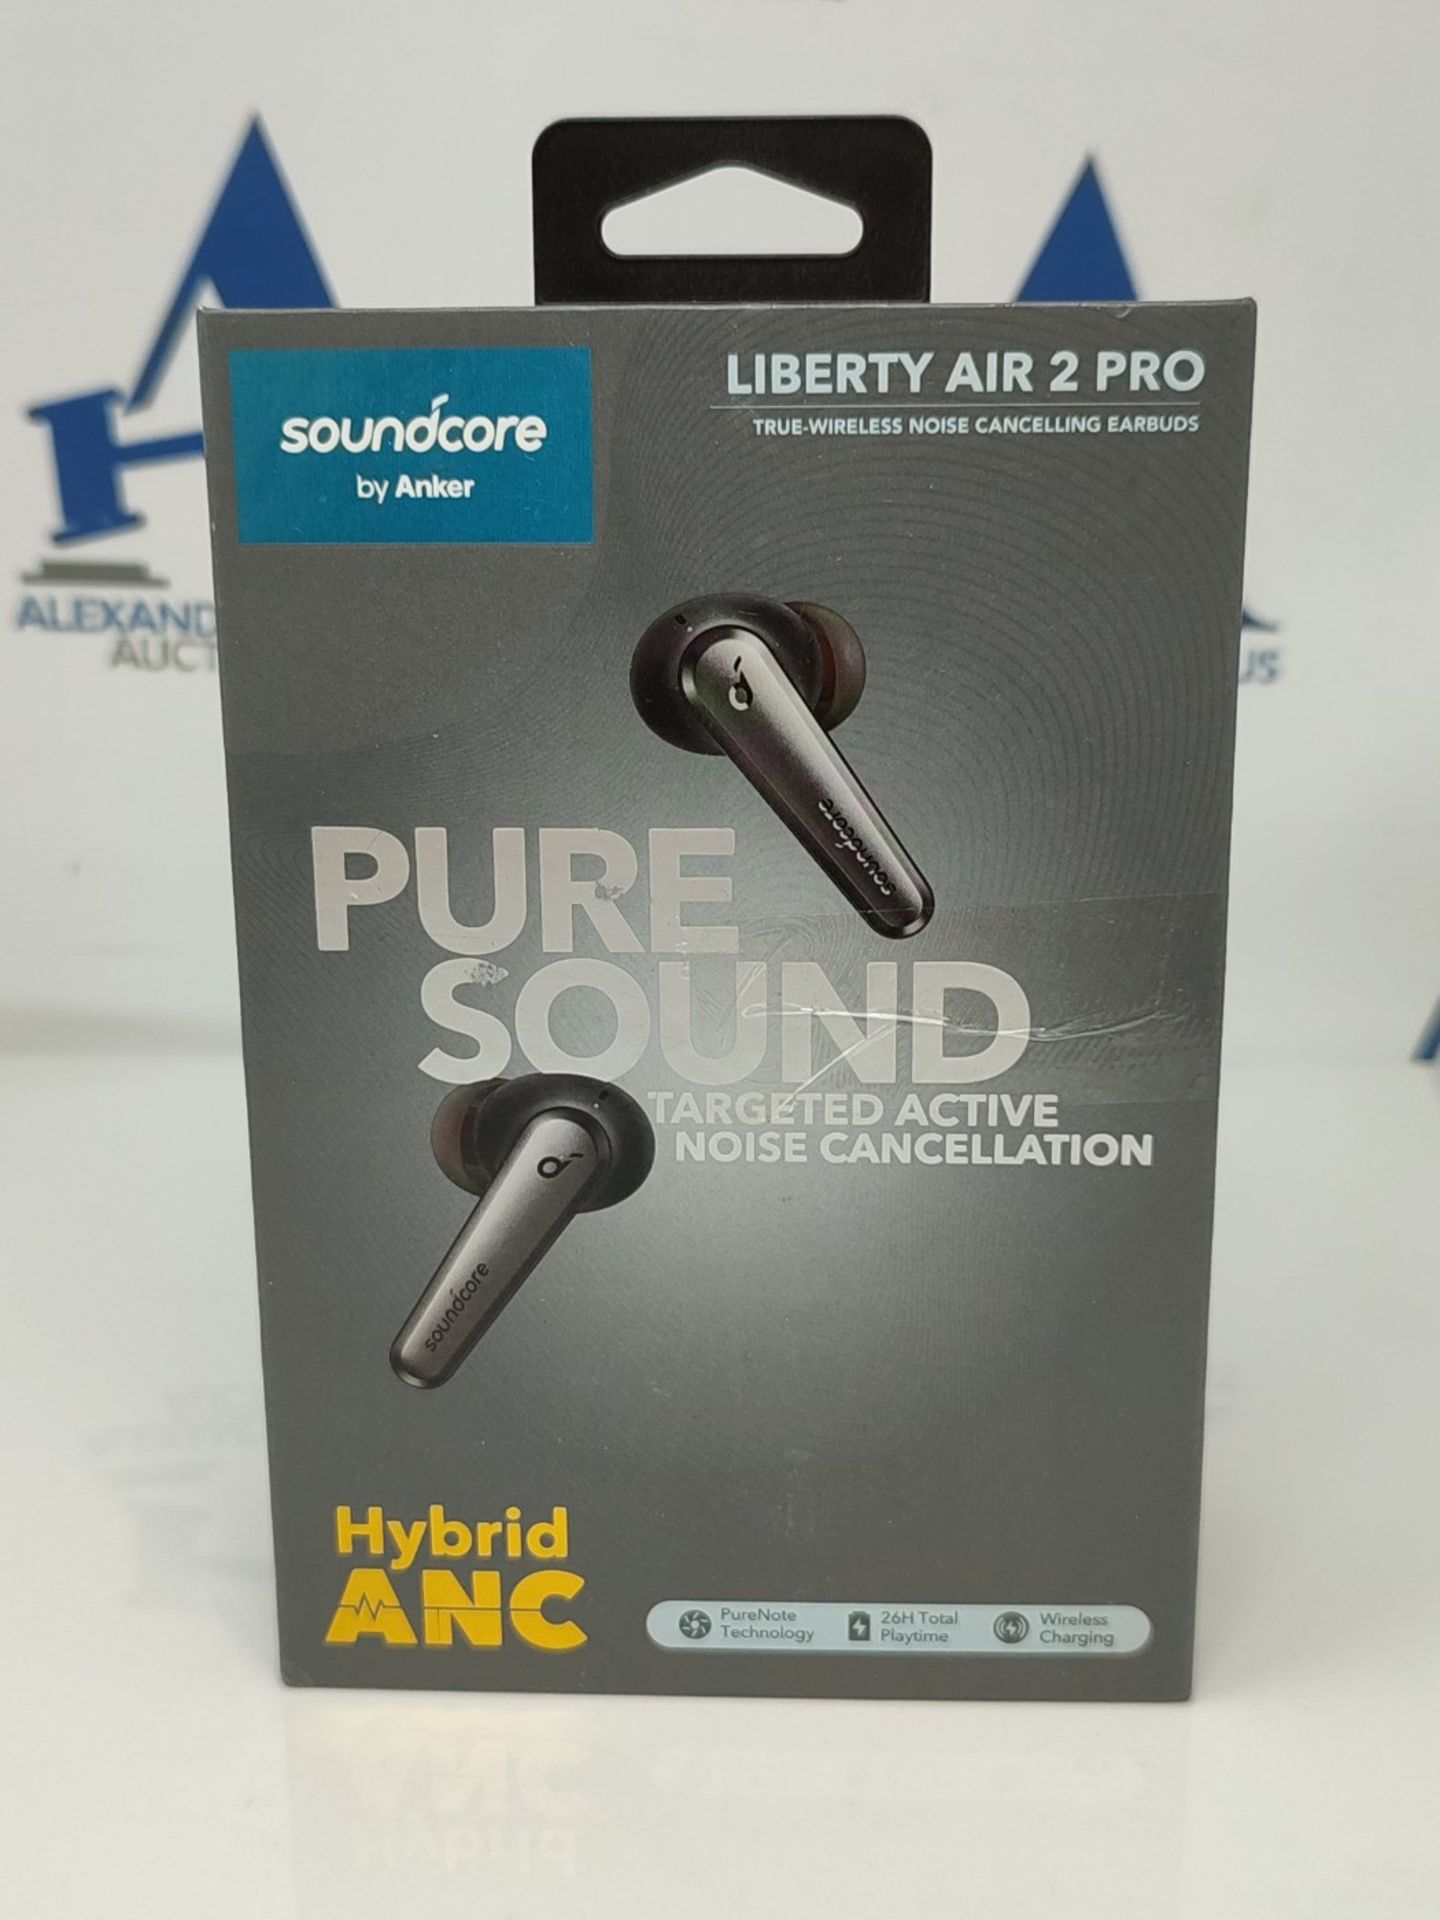 RRP £76.00 Soundcore True Wireless Earphones Liberty Air 2 Pro by Anker, targeted active noise ca - Image 2 of 6